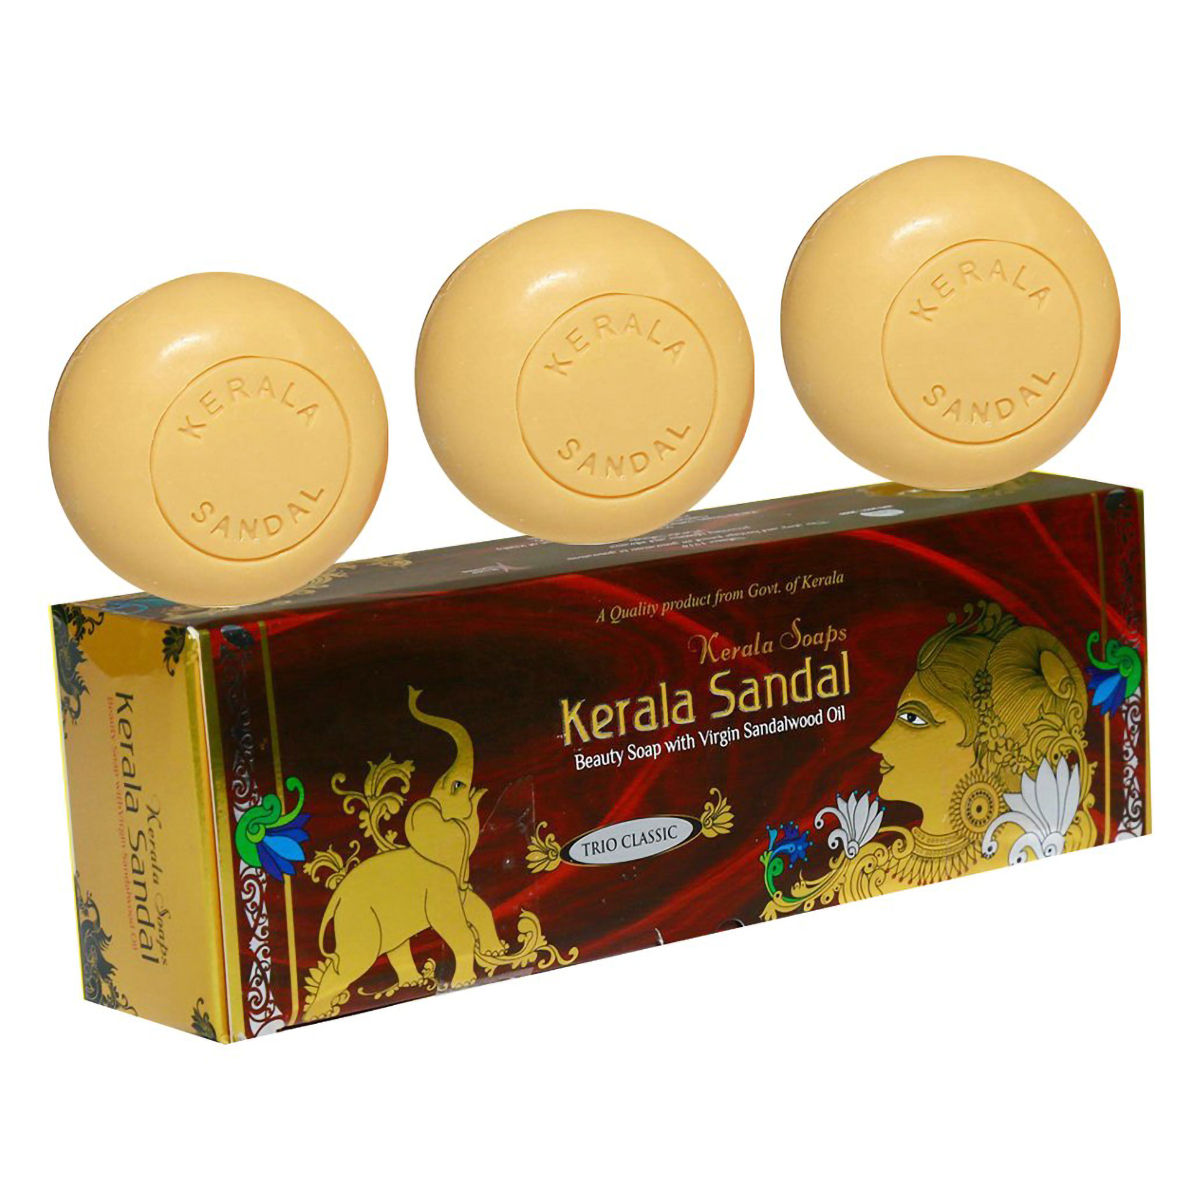 Buy Tritha Sandal Soap 75 gram (Sandal) 100% Handmade Soap Kerala Coconut  Oil Based (Pack of 3) Online at Low Prices in India - Amazon.in